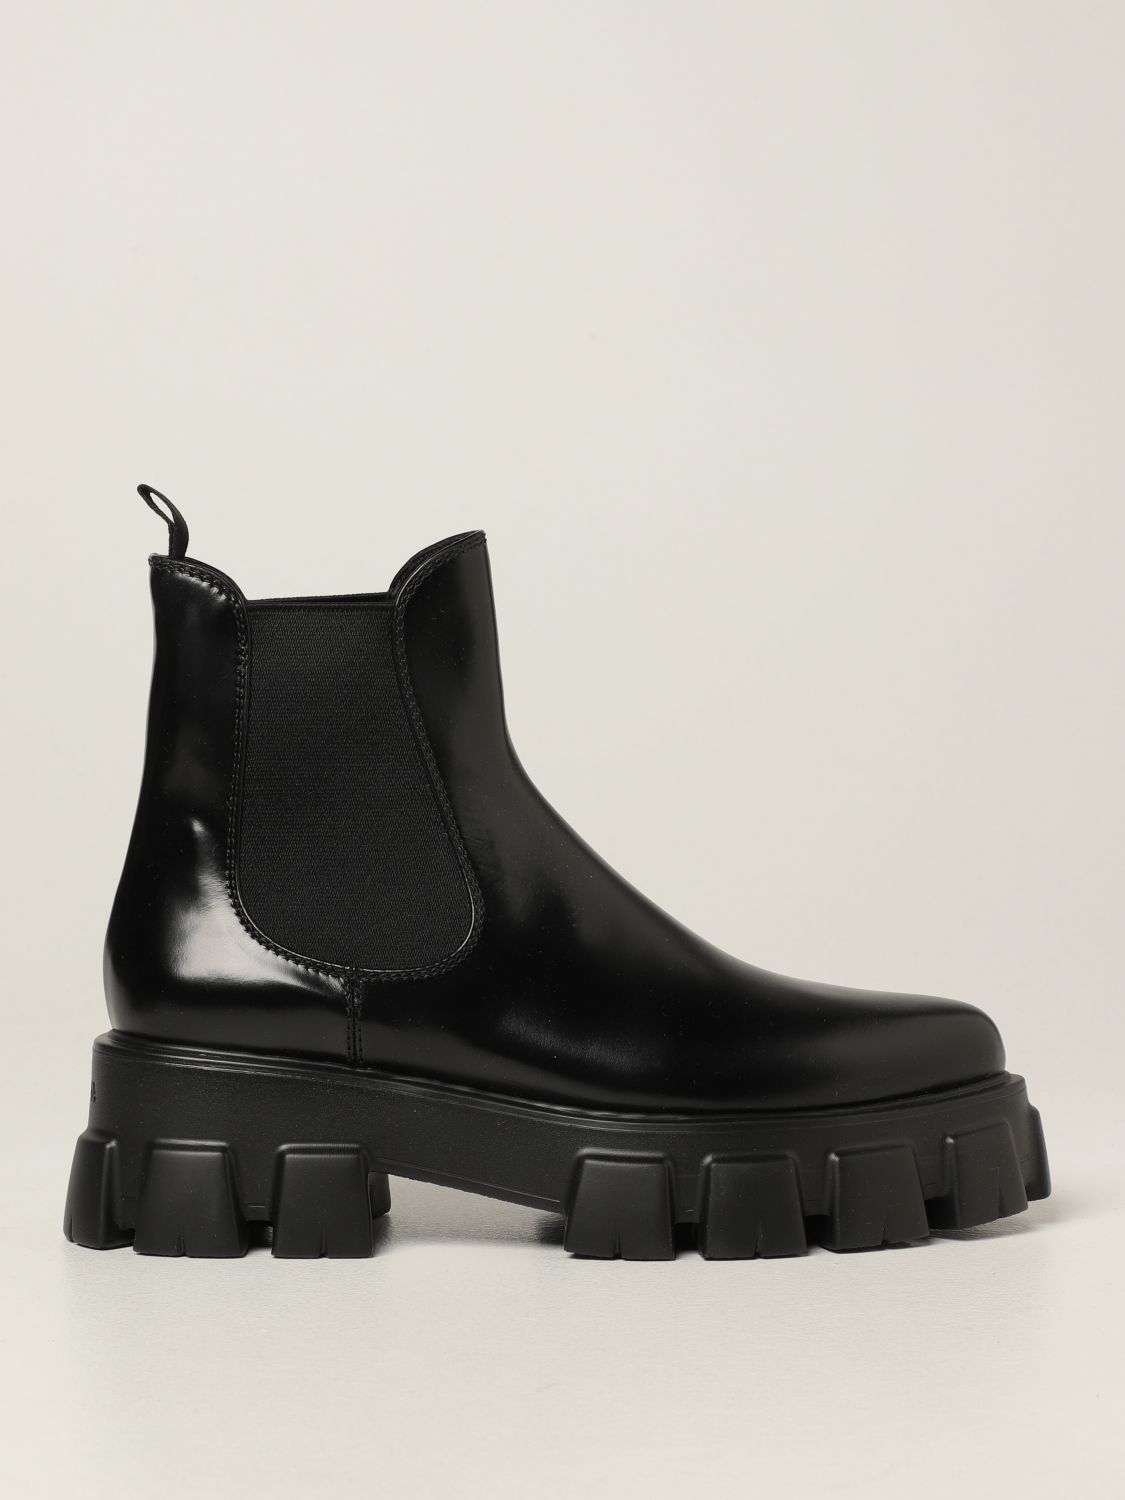 PRADA: Monolith ankle boots in brushed leather | Flat Booties Prada